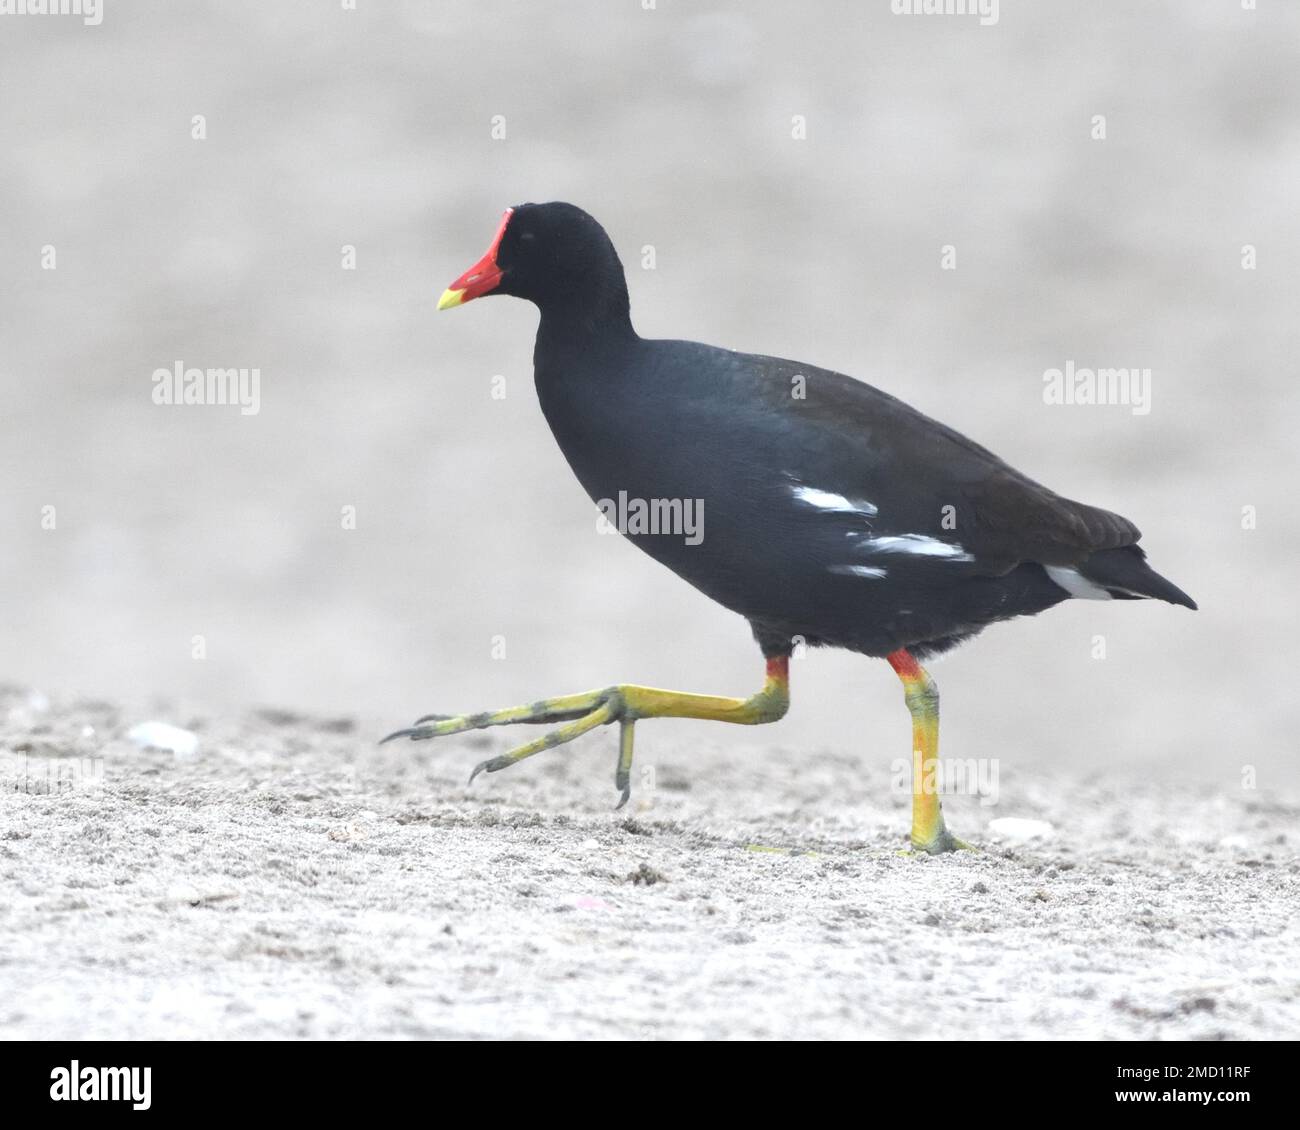 A common gallinule (Gallinula galeata) displays its long toes as it walks through sand between a pool and the sea. Pantanos de Villa Wildlife Refuge, Stock Photo